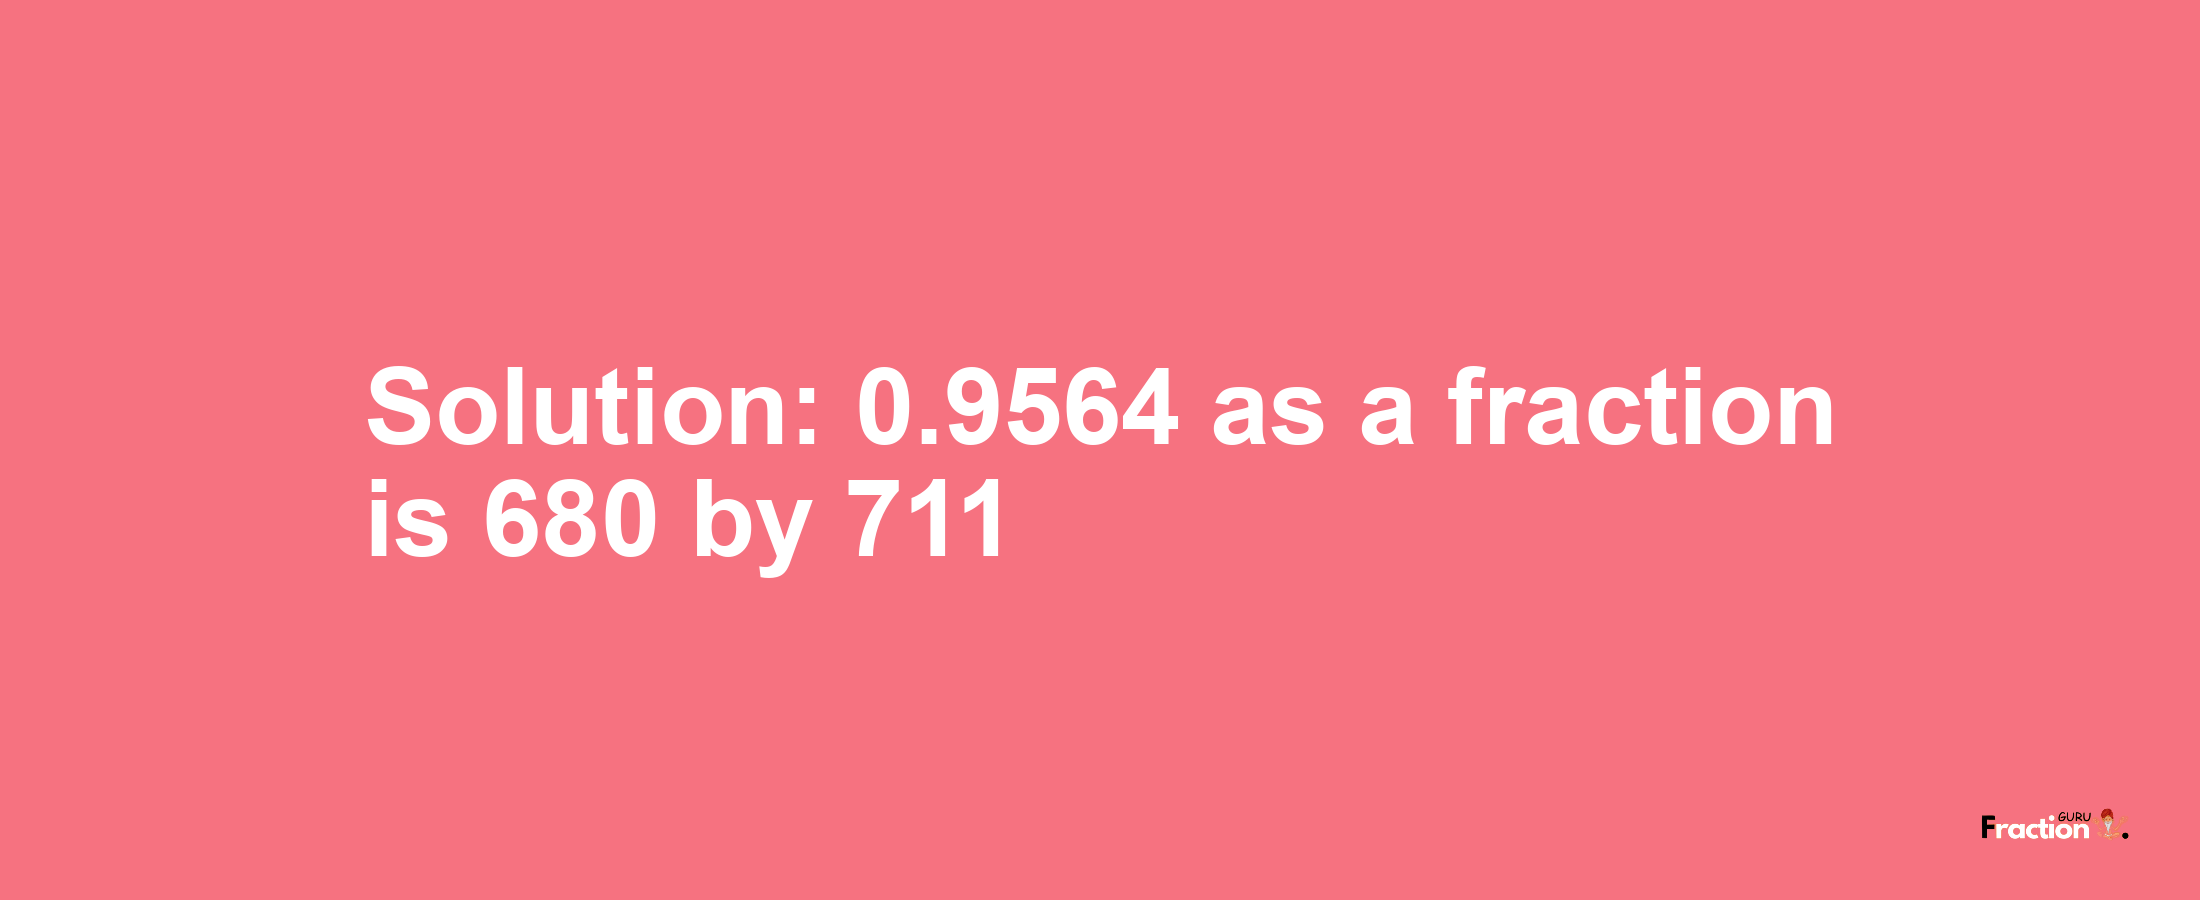 Solution:0.9564 as a fraction is 680/711